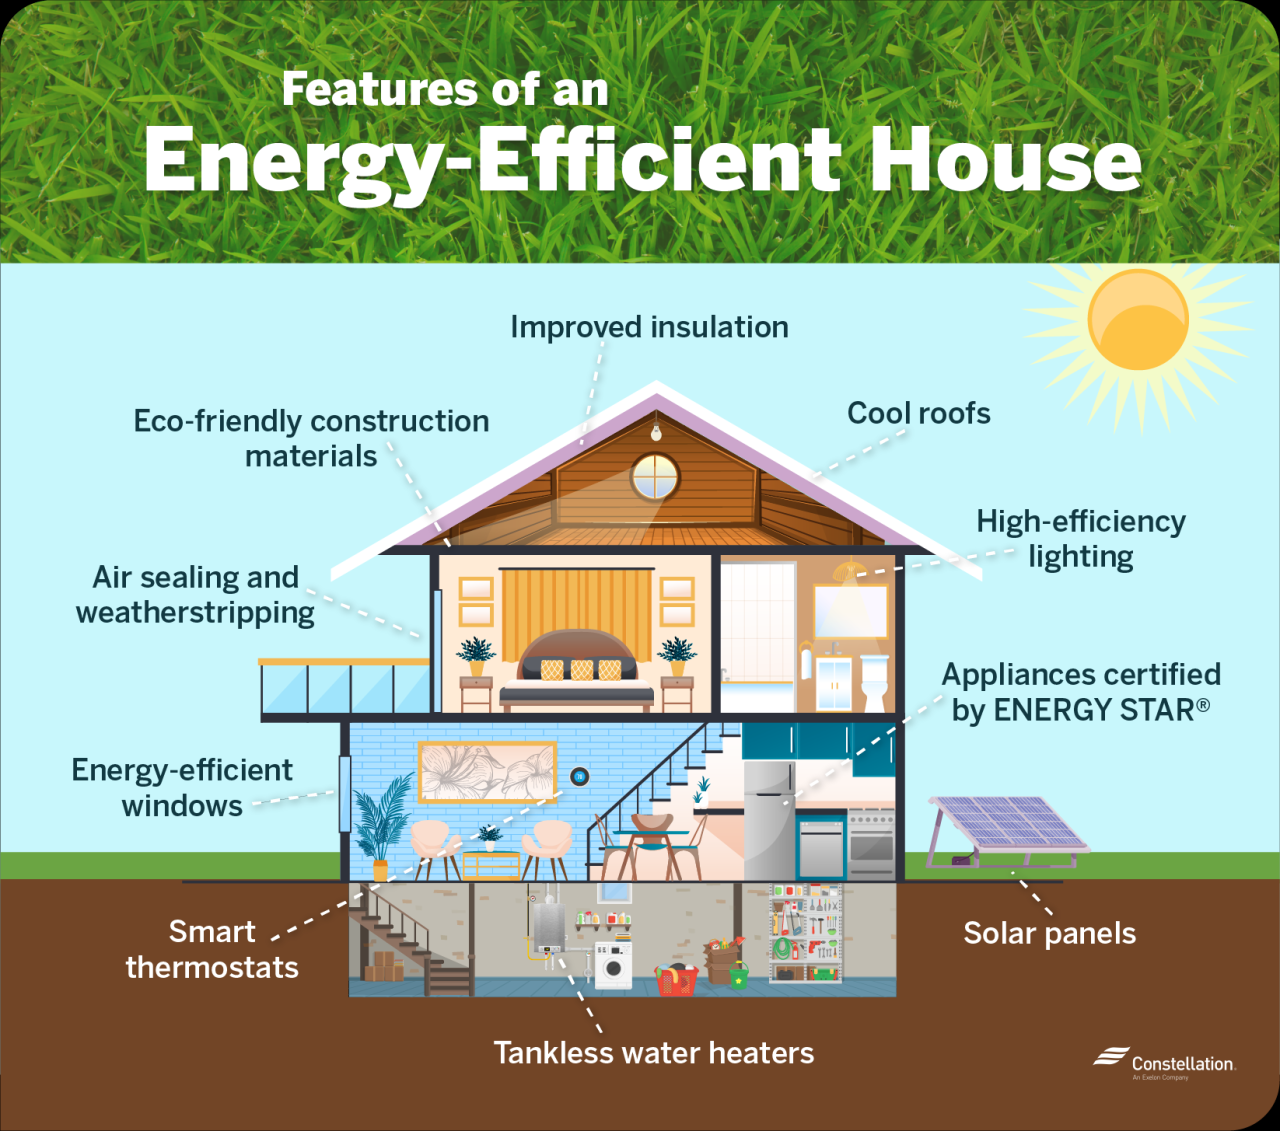 Energy efficient homes efficiency save money ways house reduce electrical appliances making conservation consumption improvements improvement building tips become easy